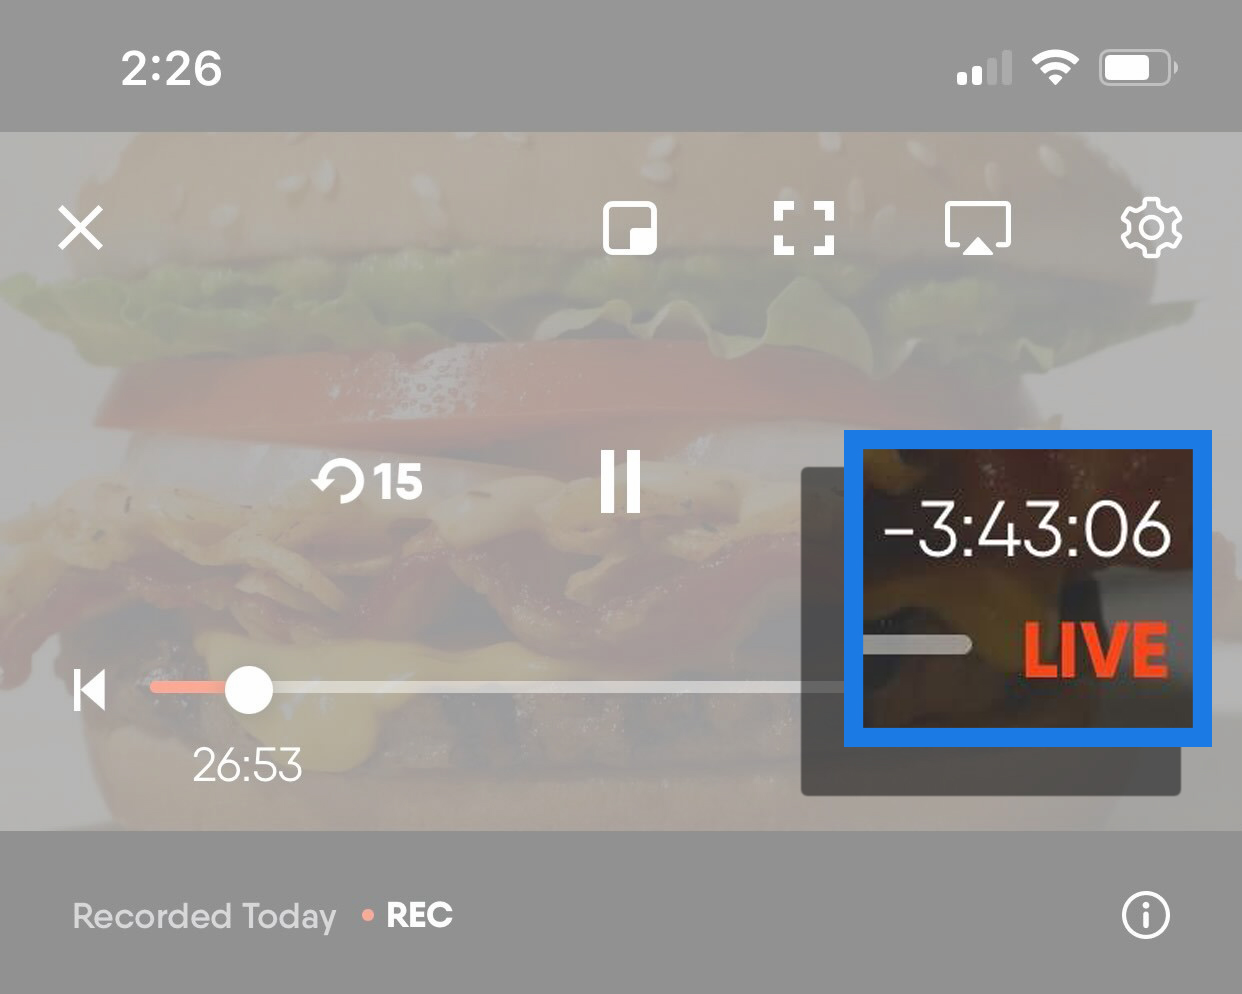 A live event on the FuboTV app on a mobile device with the live button highlighted; pressing this button will automatically jump to live programming.